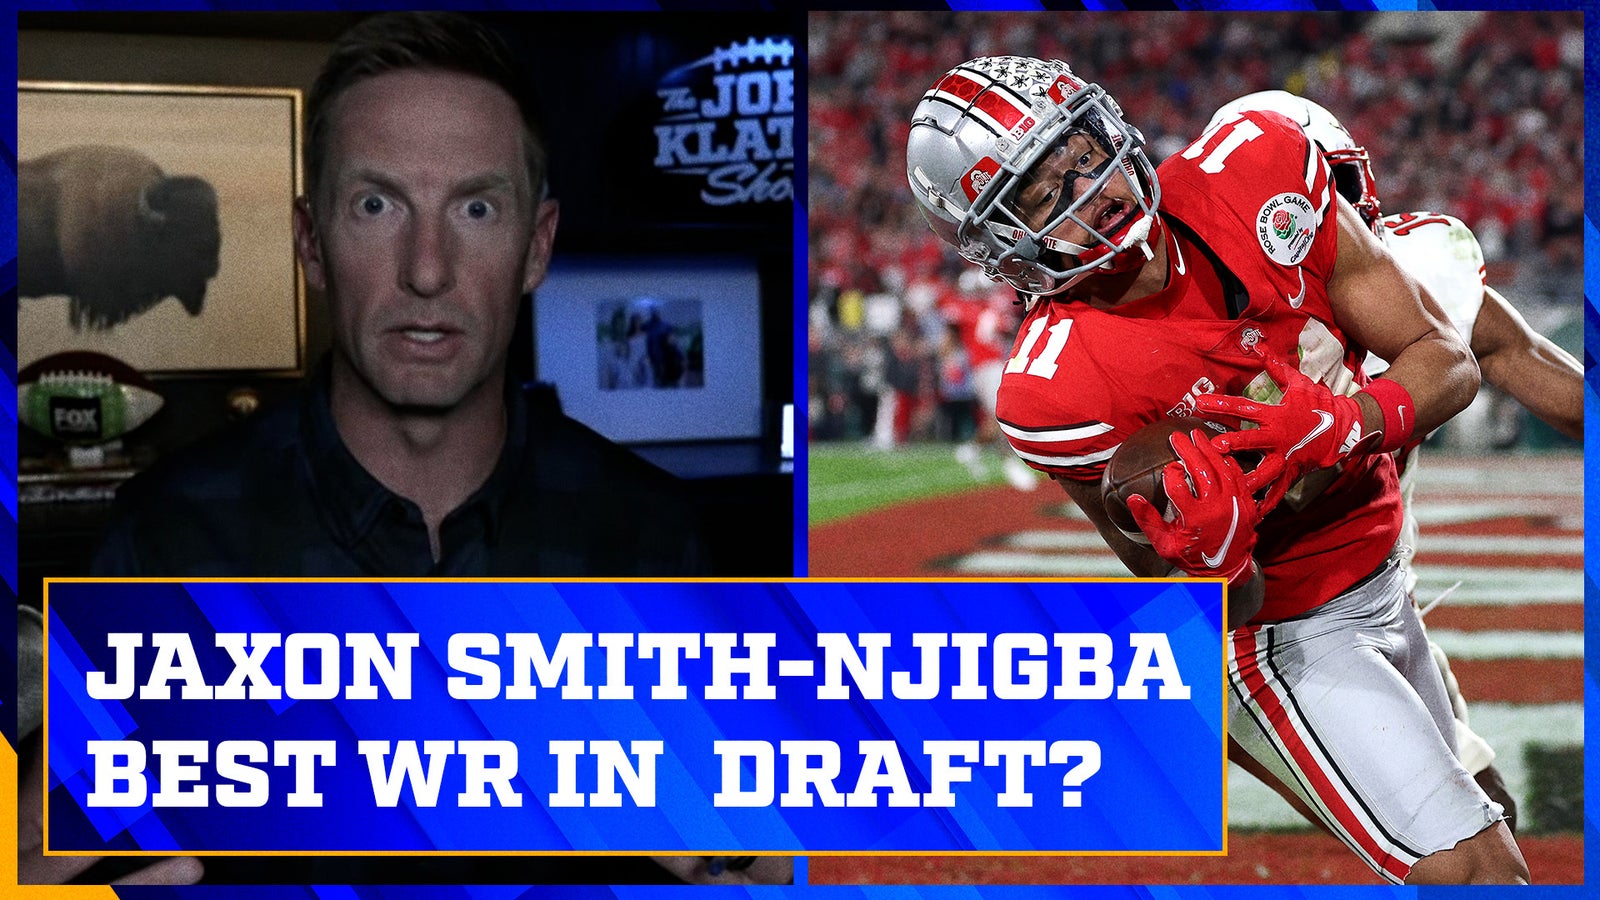 Is Jaxon Smith-Njigba the No. 1 wide receiver in the NFL Draft?